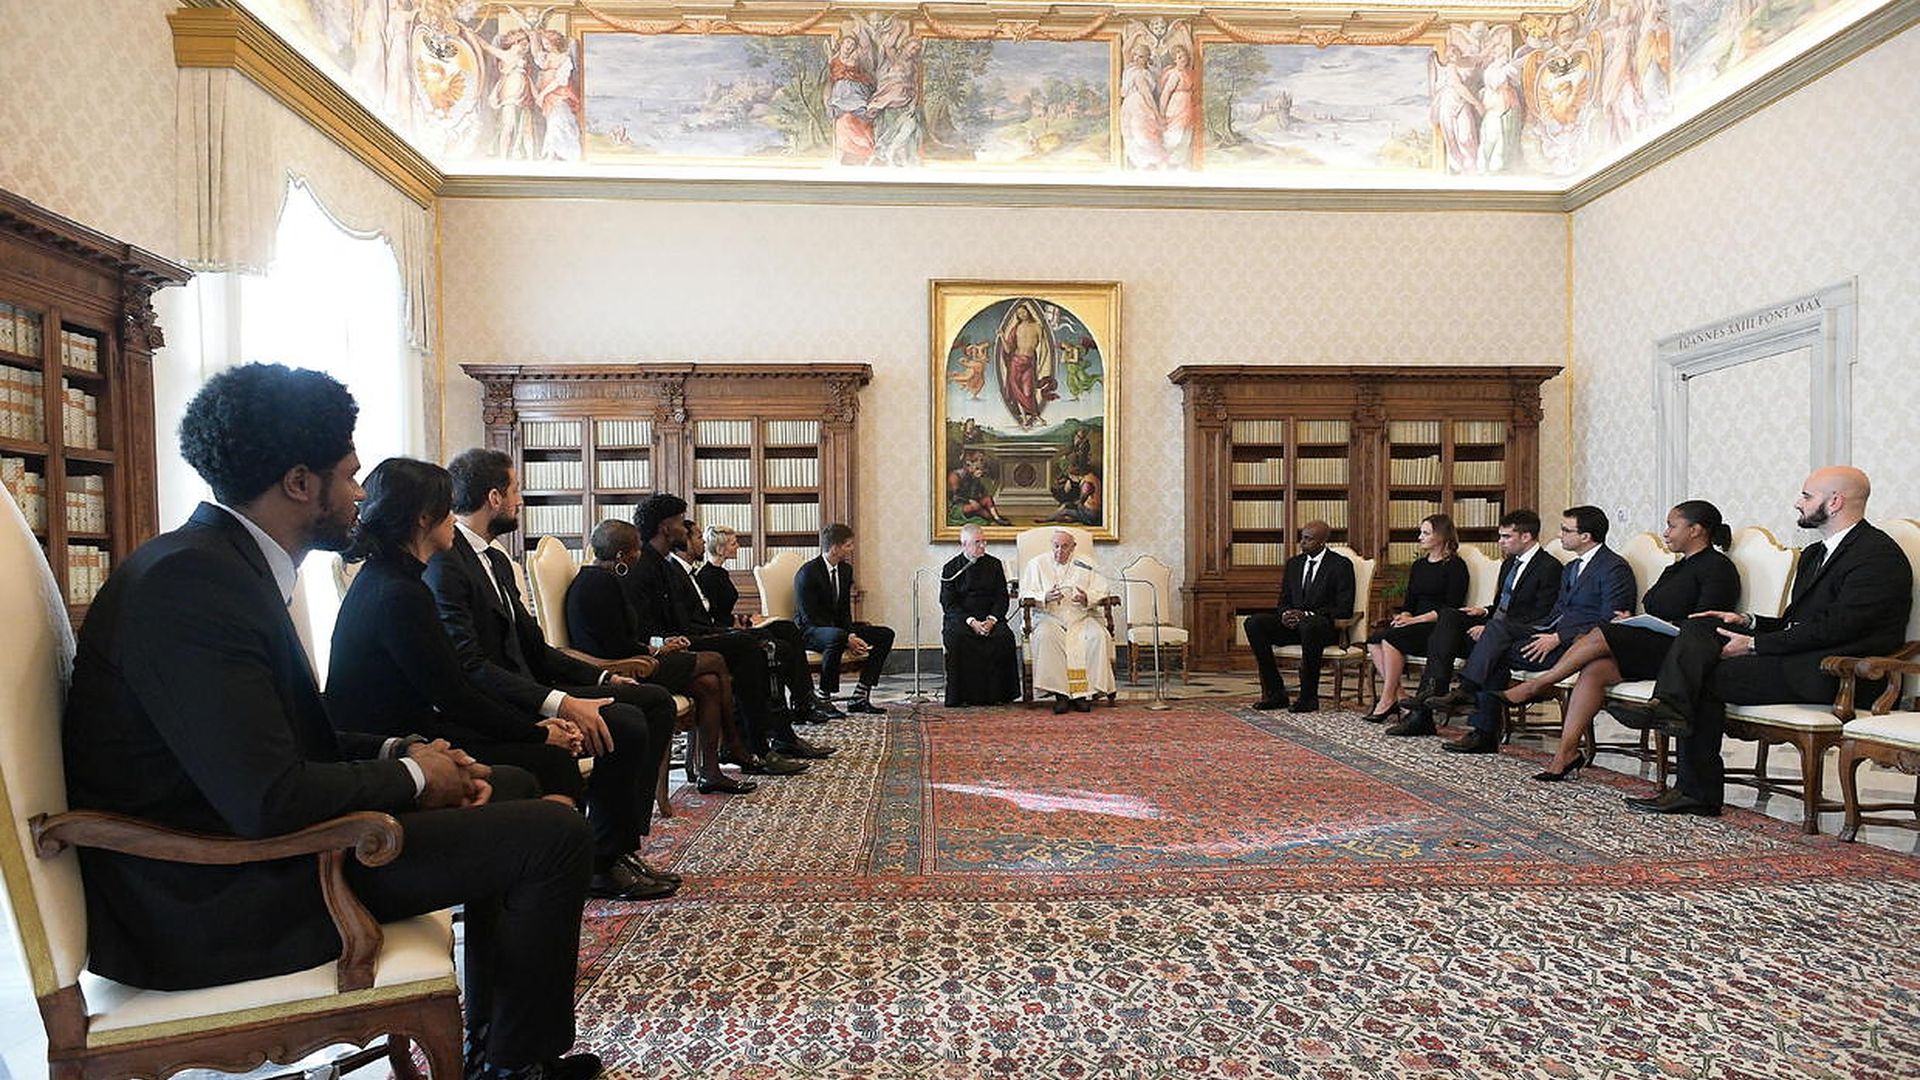 Pope Francis meets a delegation of five NBA players and officials from the National Basketball Players Association at the Vatican.